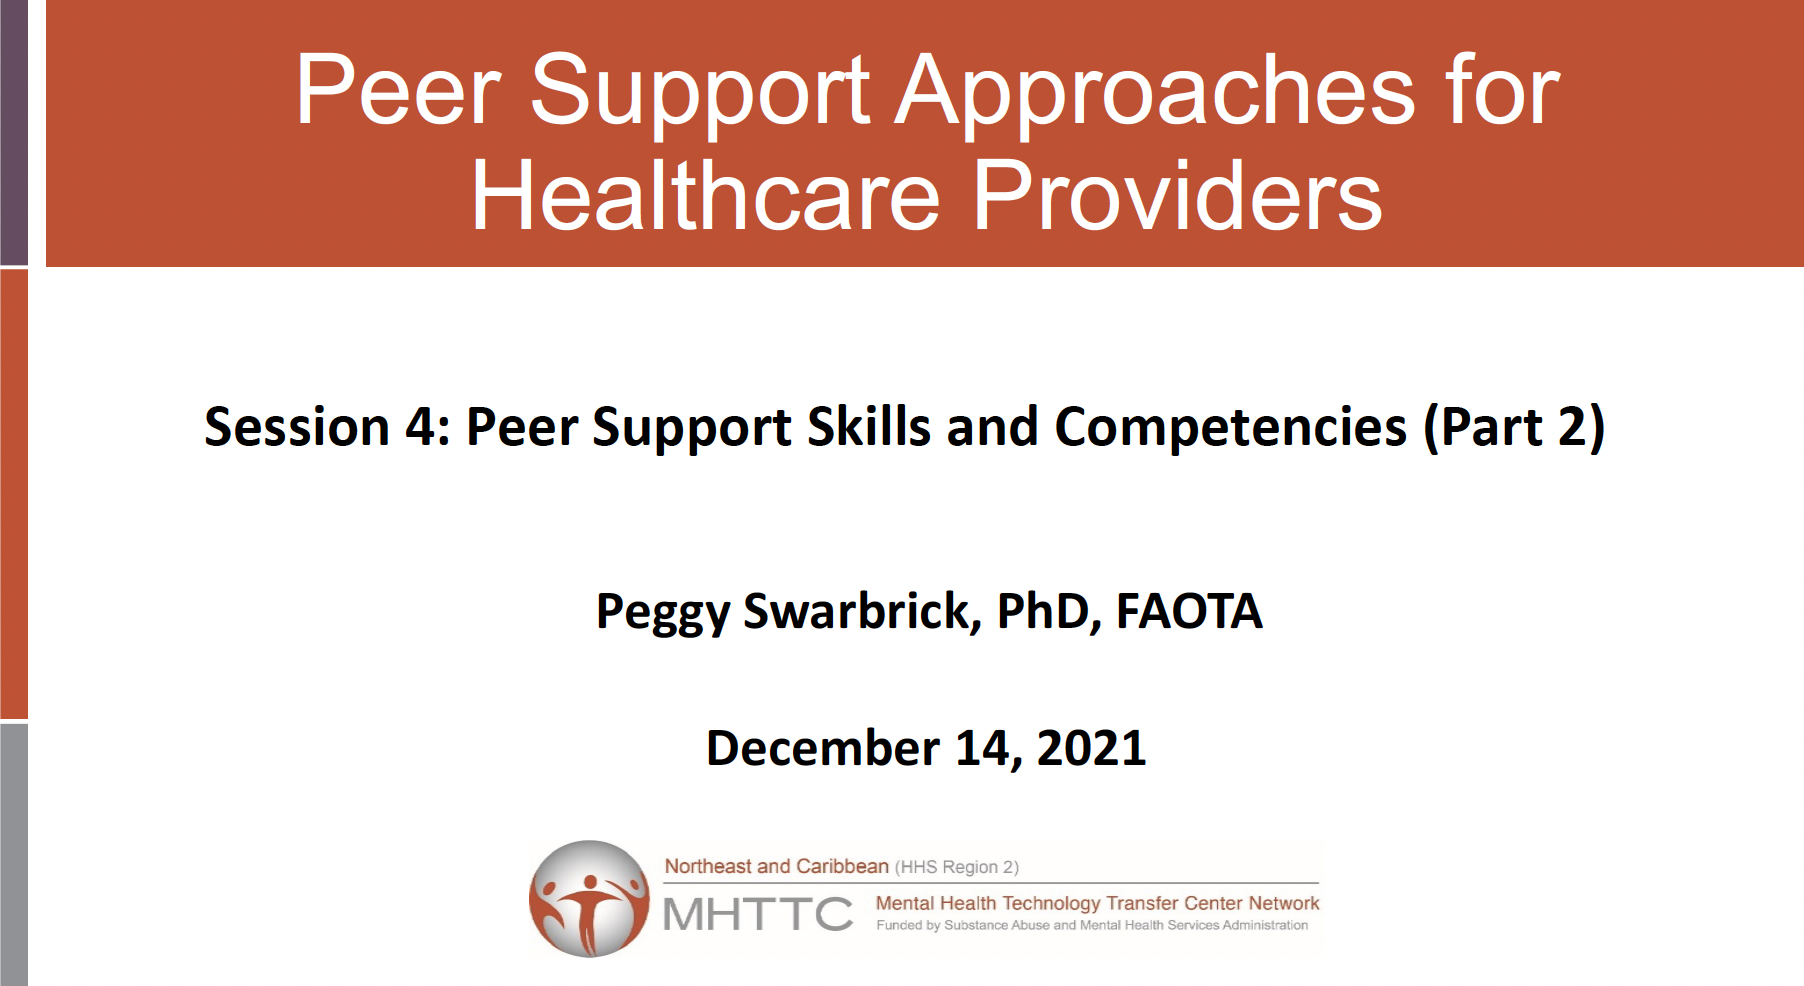 Peer Support Approaches for Healthcare Providers Session 4: Peer Support Skills and Competencies, Part 2